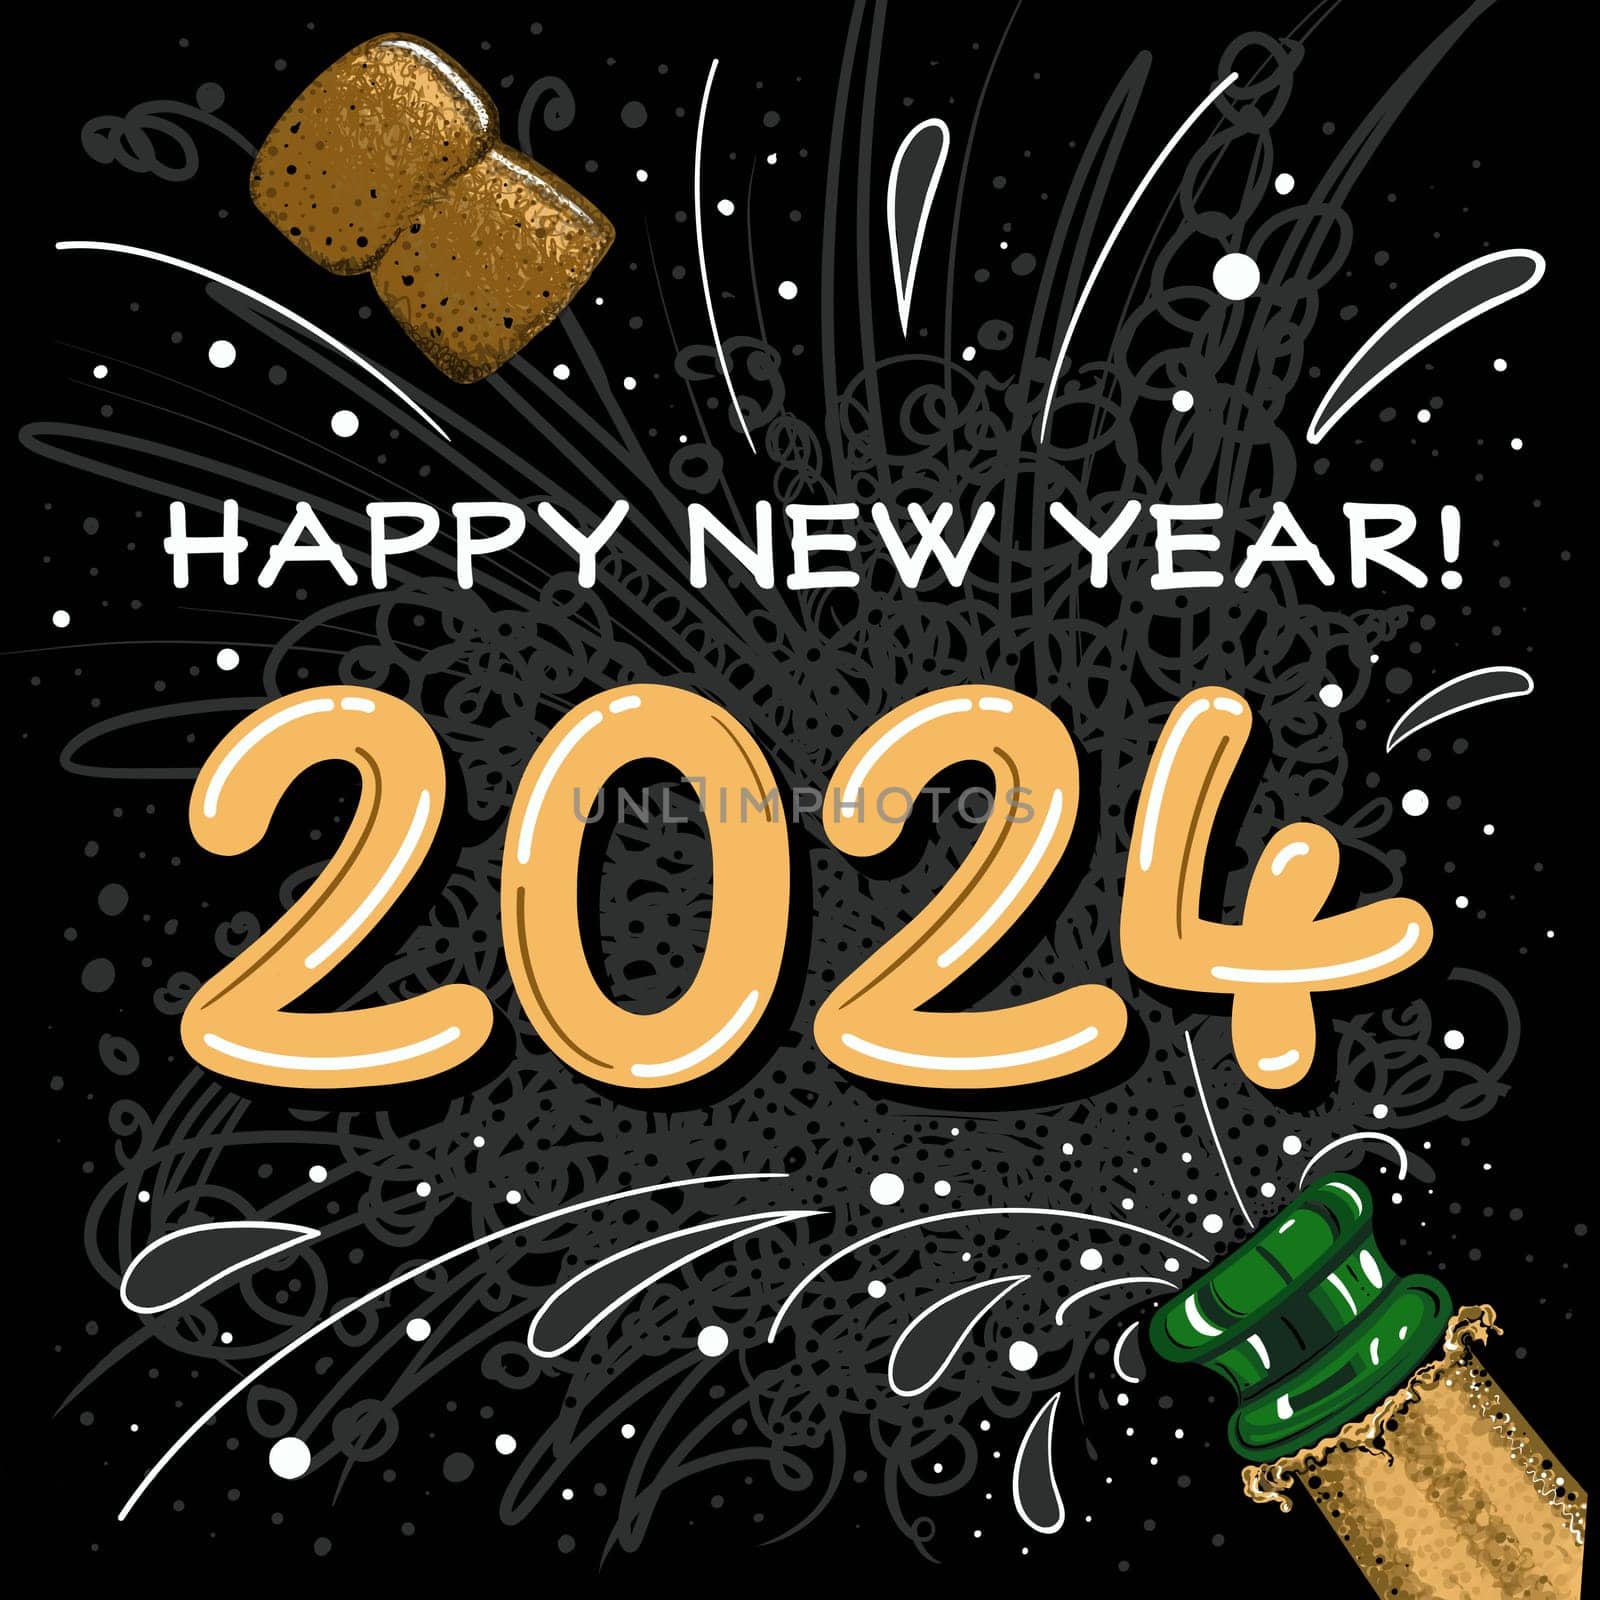 Happy new year illustration. Champagne cork being popped on New Year's Eve. 2024 New year celebration. Gold colours on a black background. Bubbles and fizz spurting from the bottle.